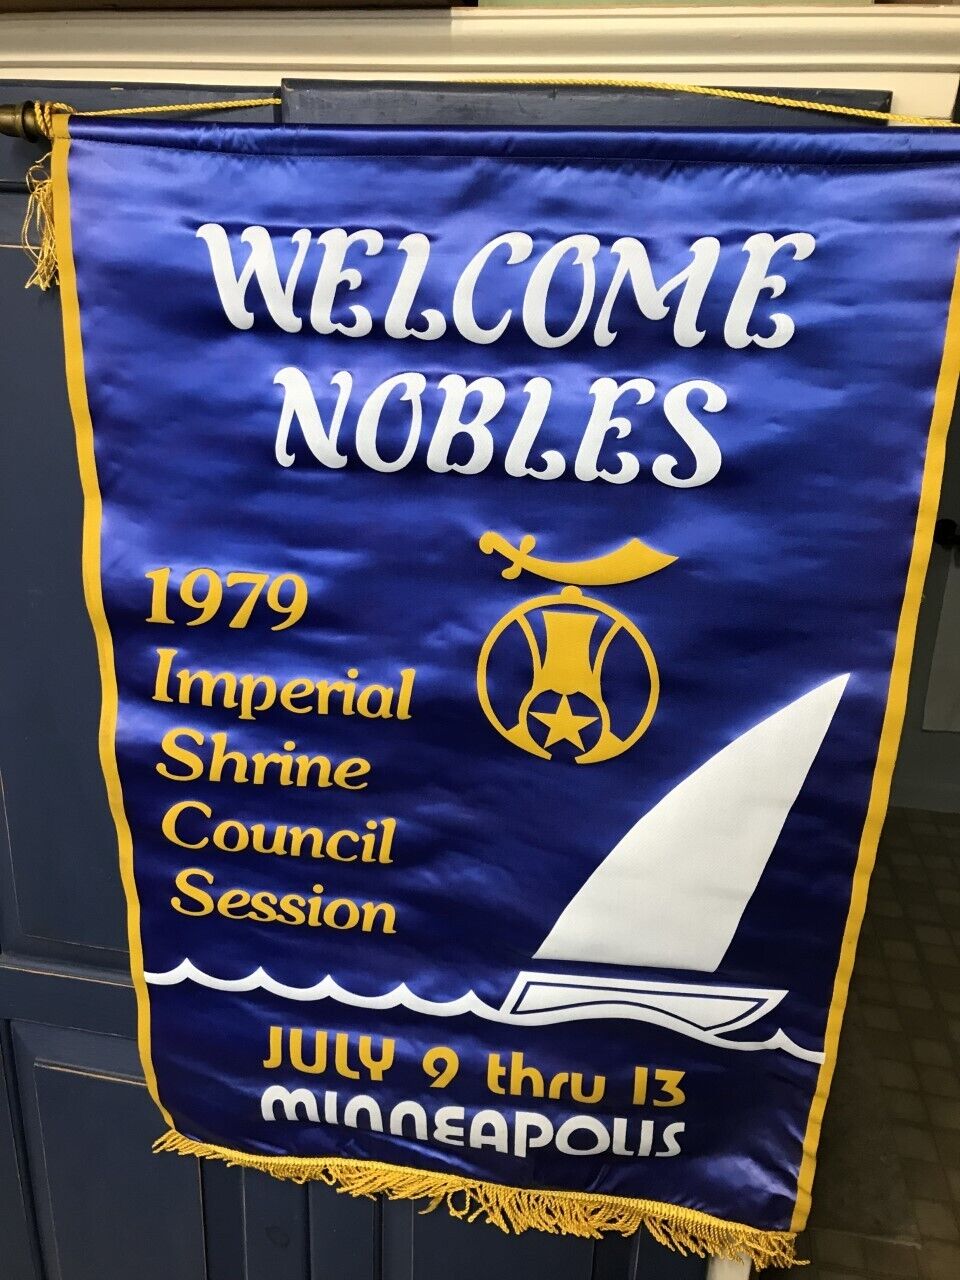 Minneapolis 1979 Imperial Sine Council Session July 9-13th Welcome Nobles Flag